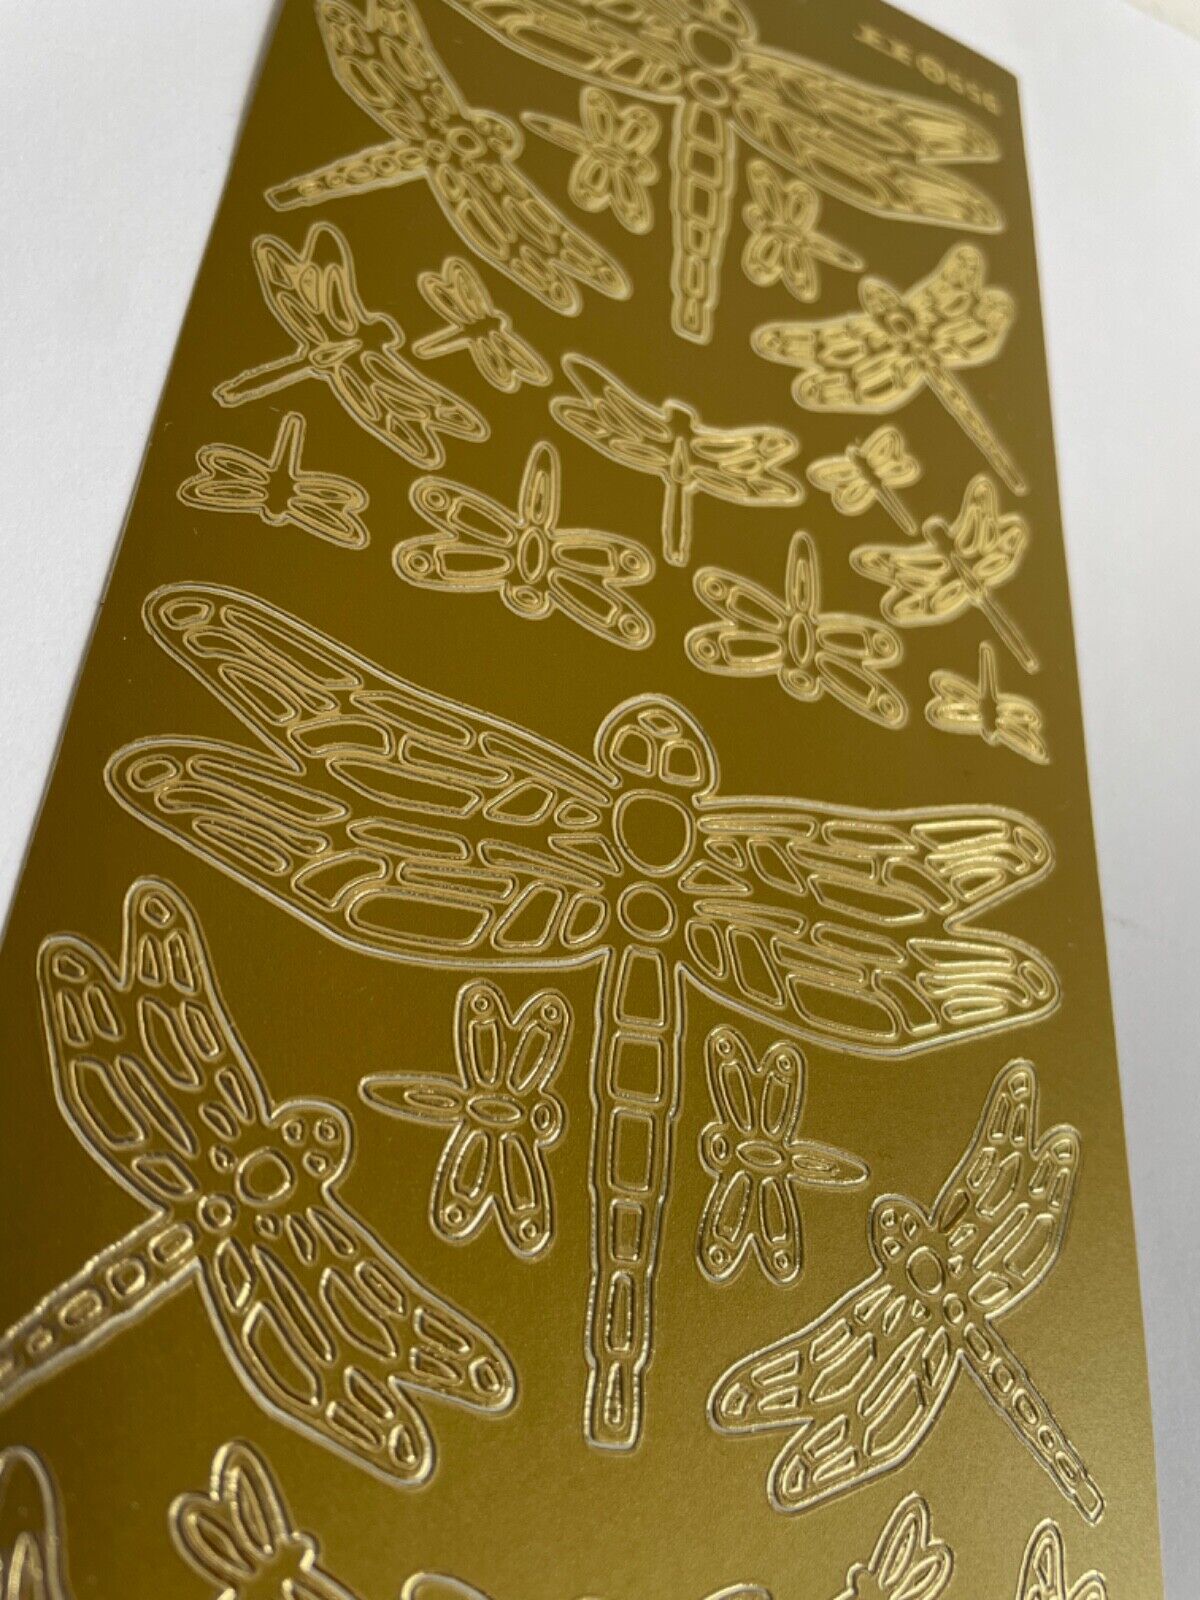 Dragonfly Peel Off Sticker Sheet 28 Assorted Stickers For Card Making Art Craft